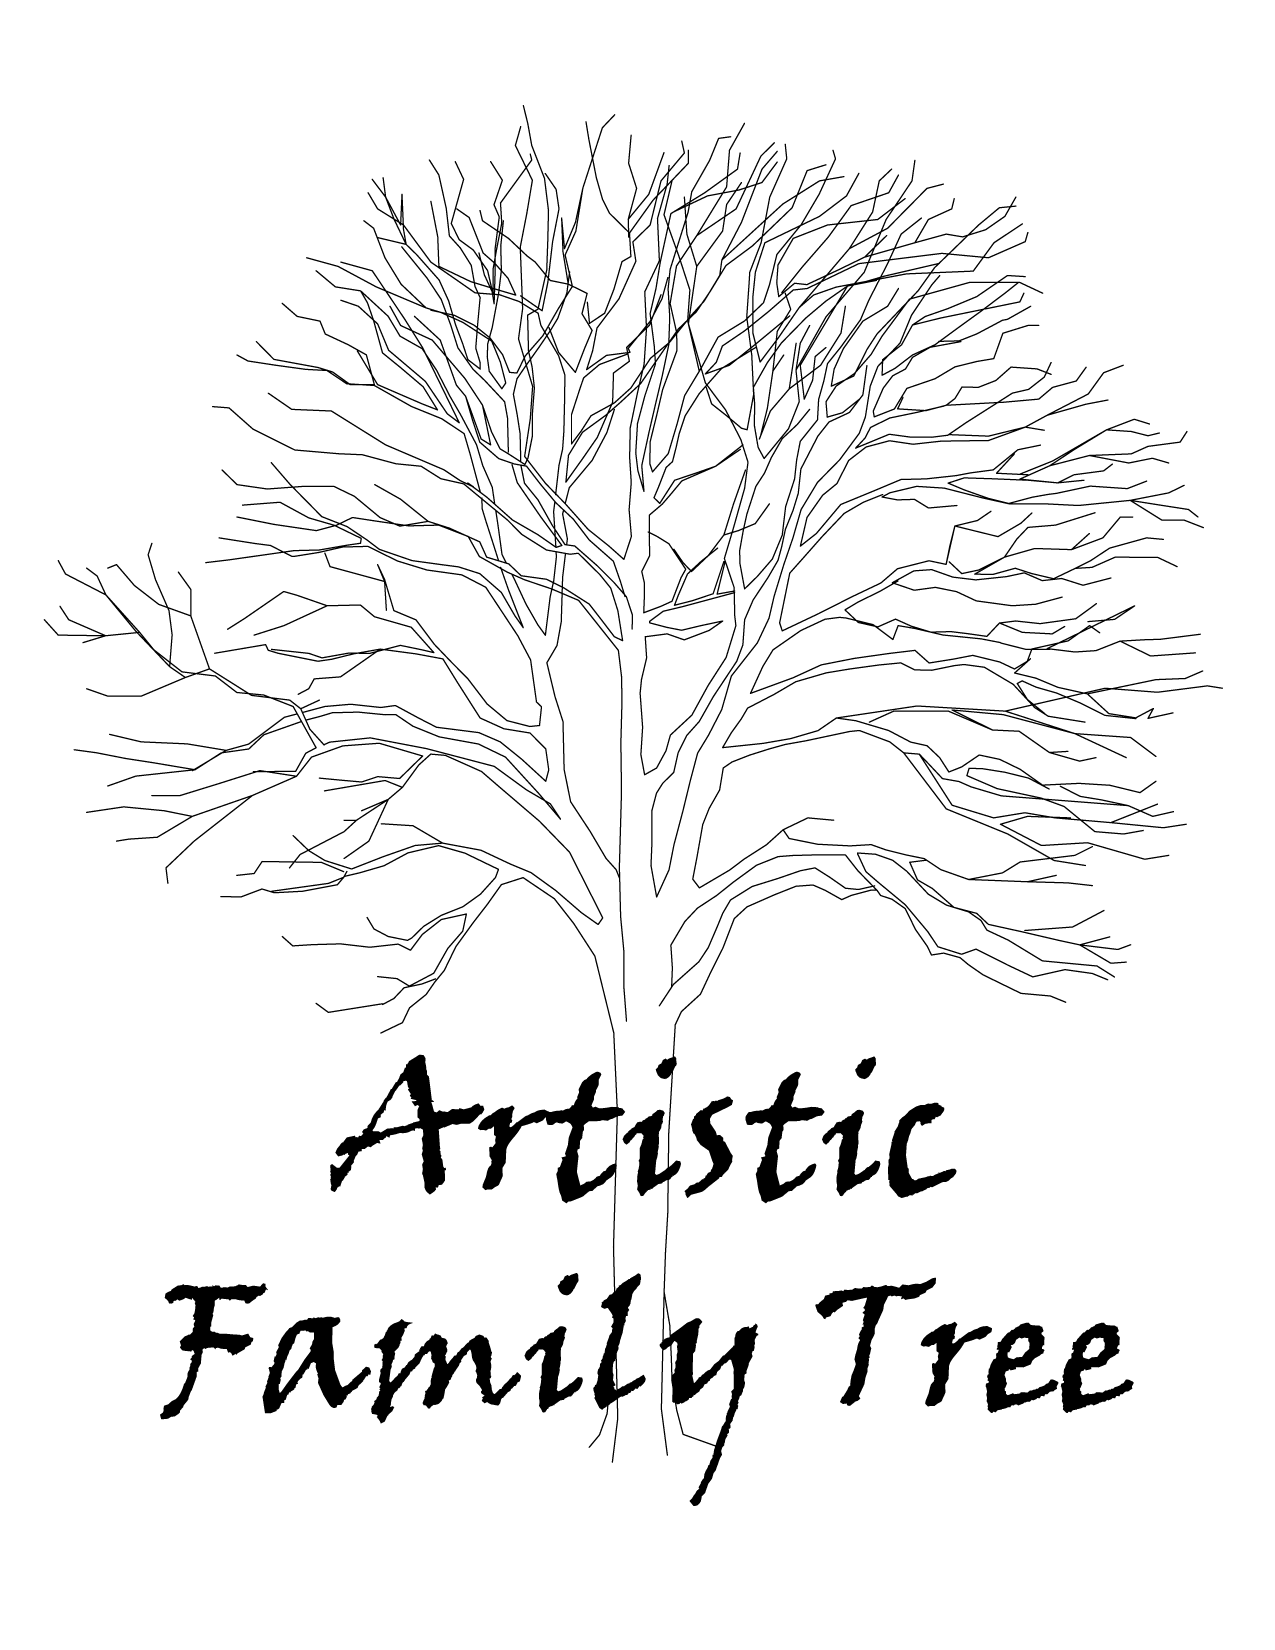 Coming soon Artistic Family Tree.